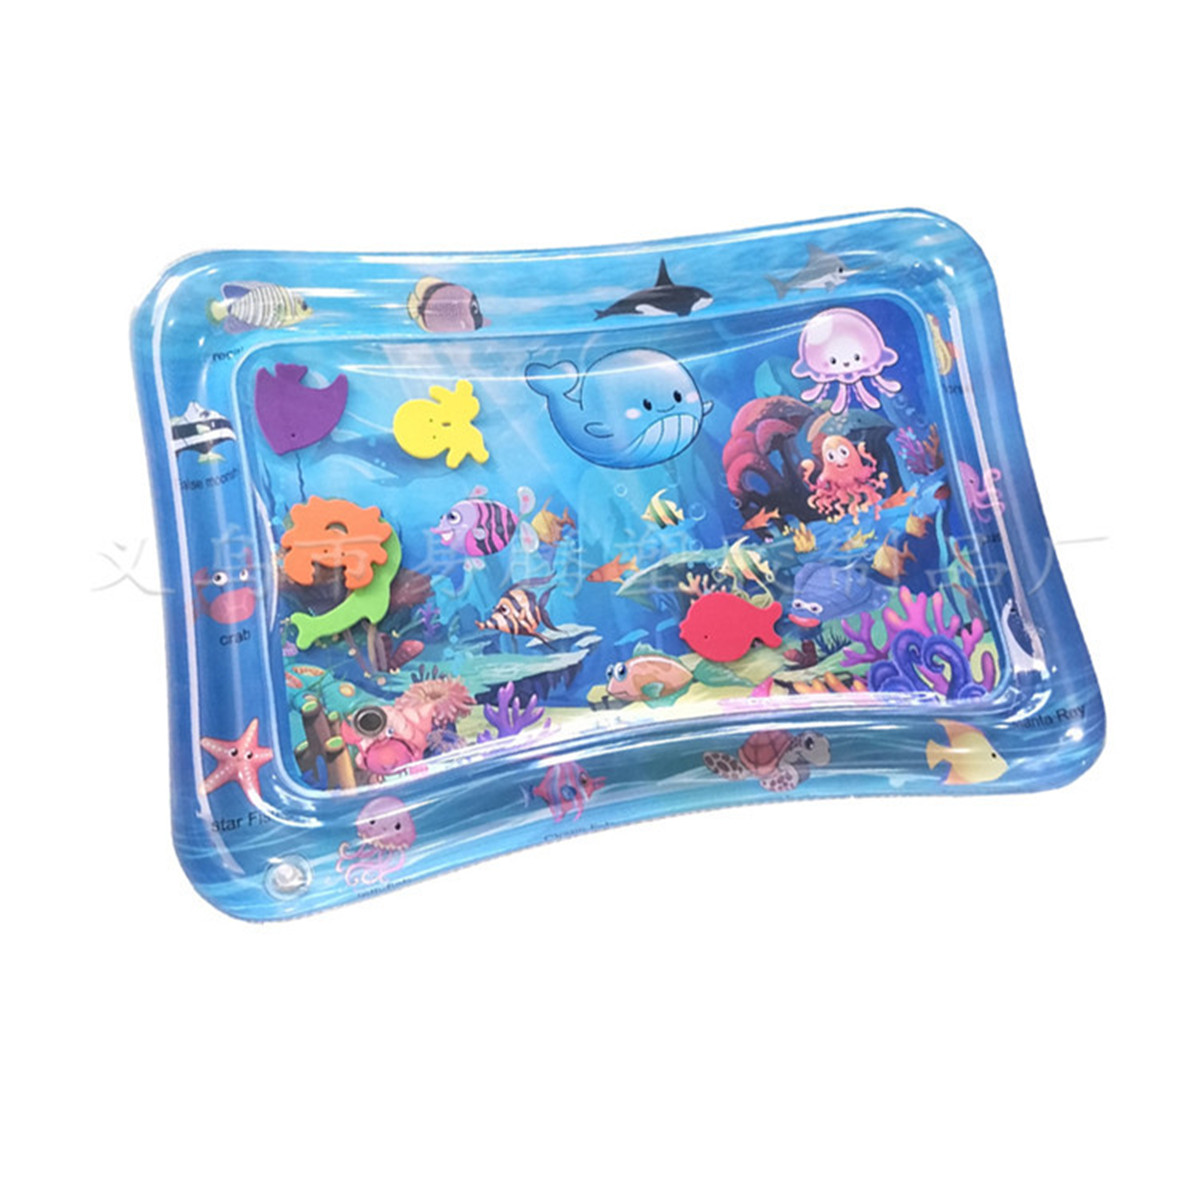 Inflatable-Baby-Water-Mat-Early-Education-Improve-Learning-Skill-Toys-for-Kids-Gift-1673925-5